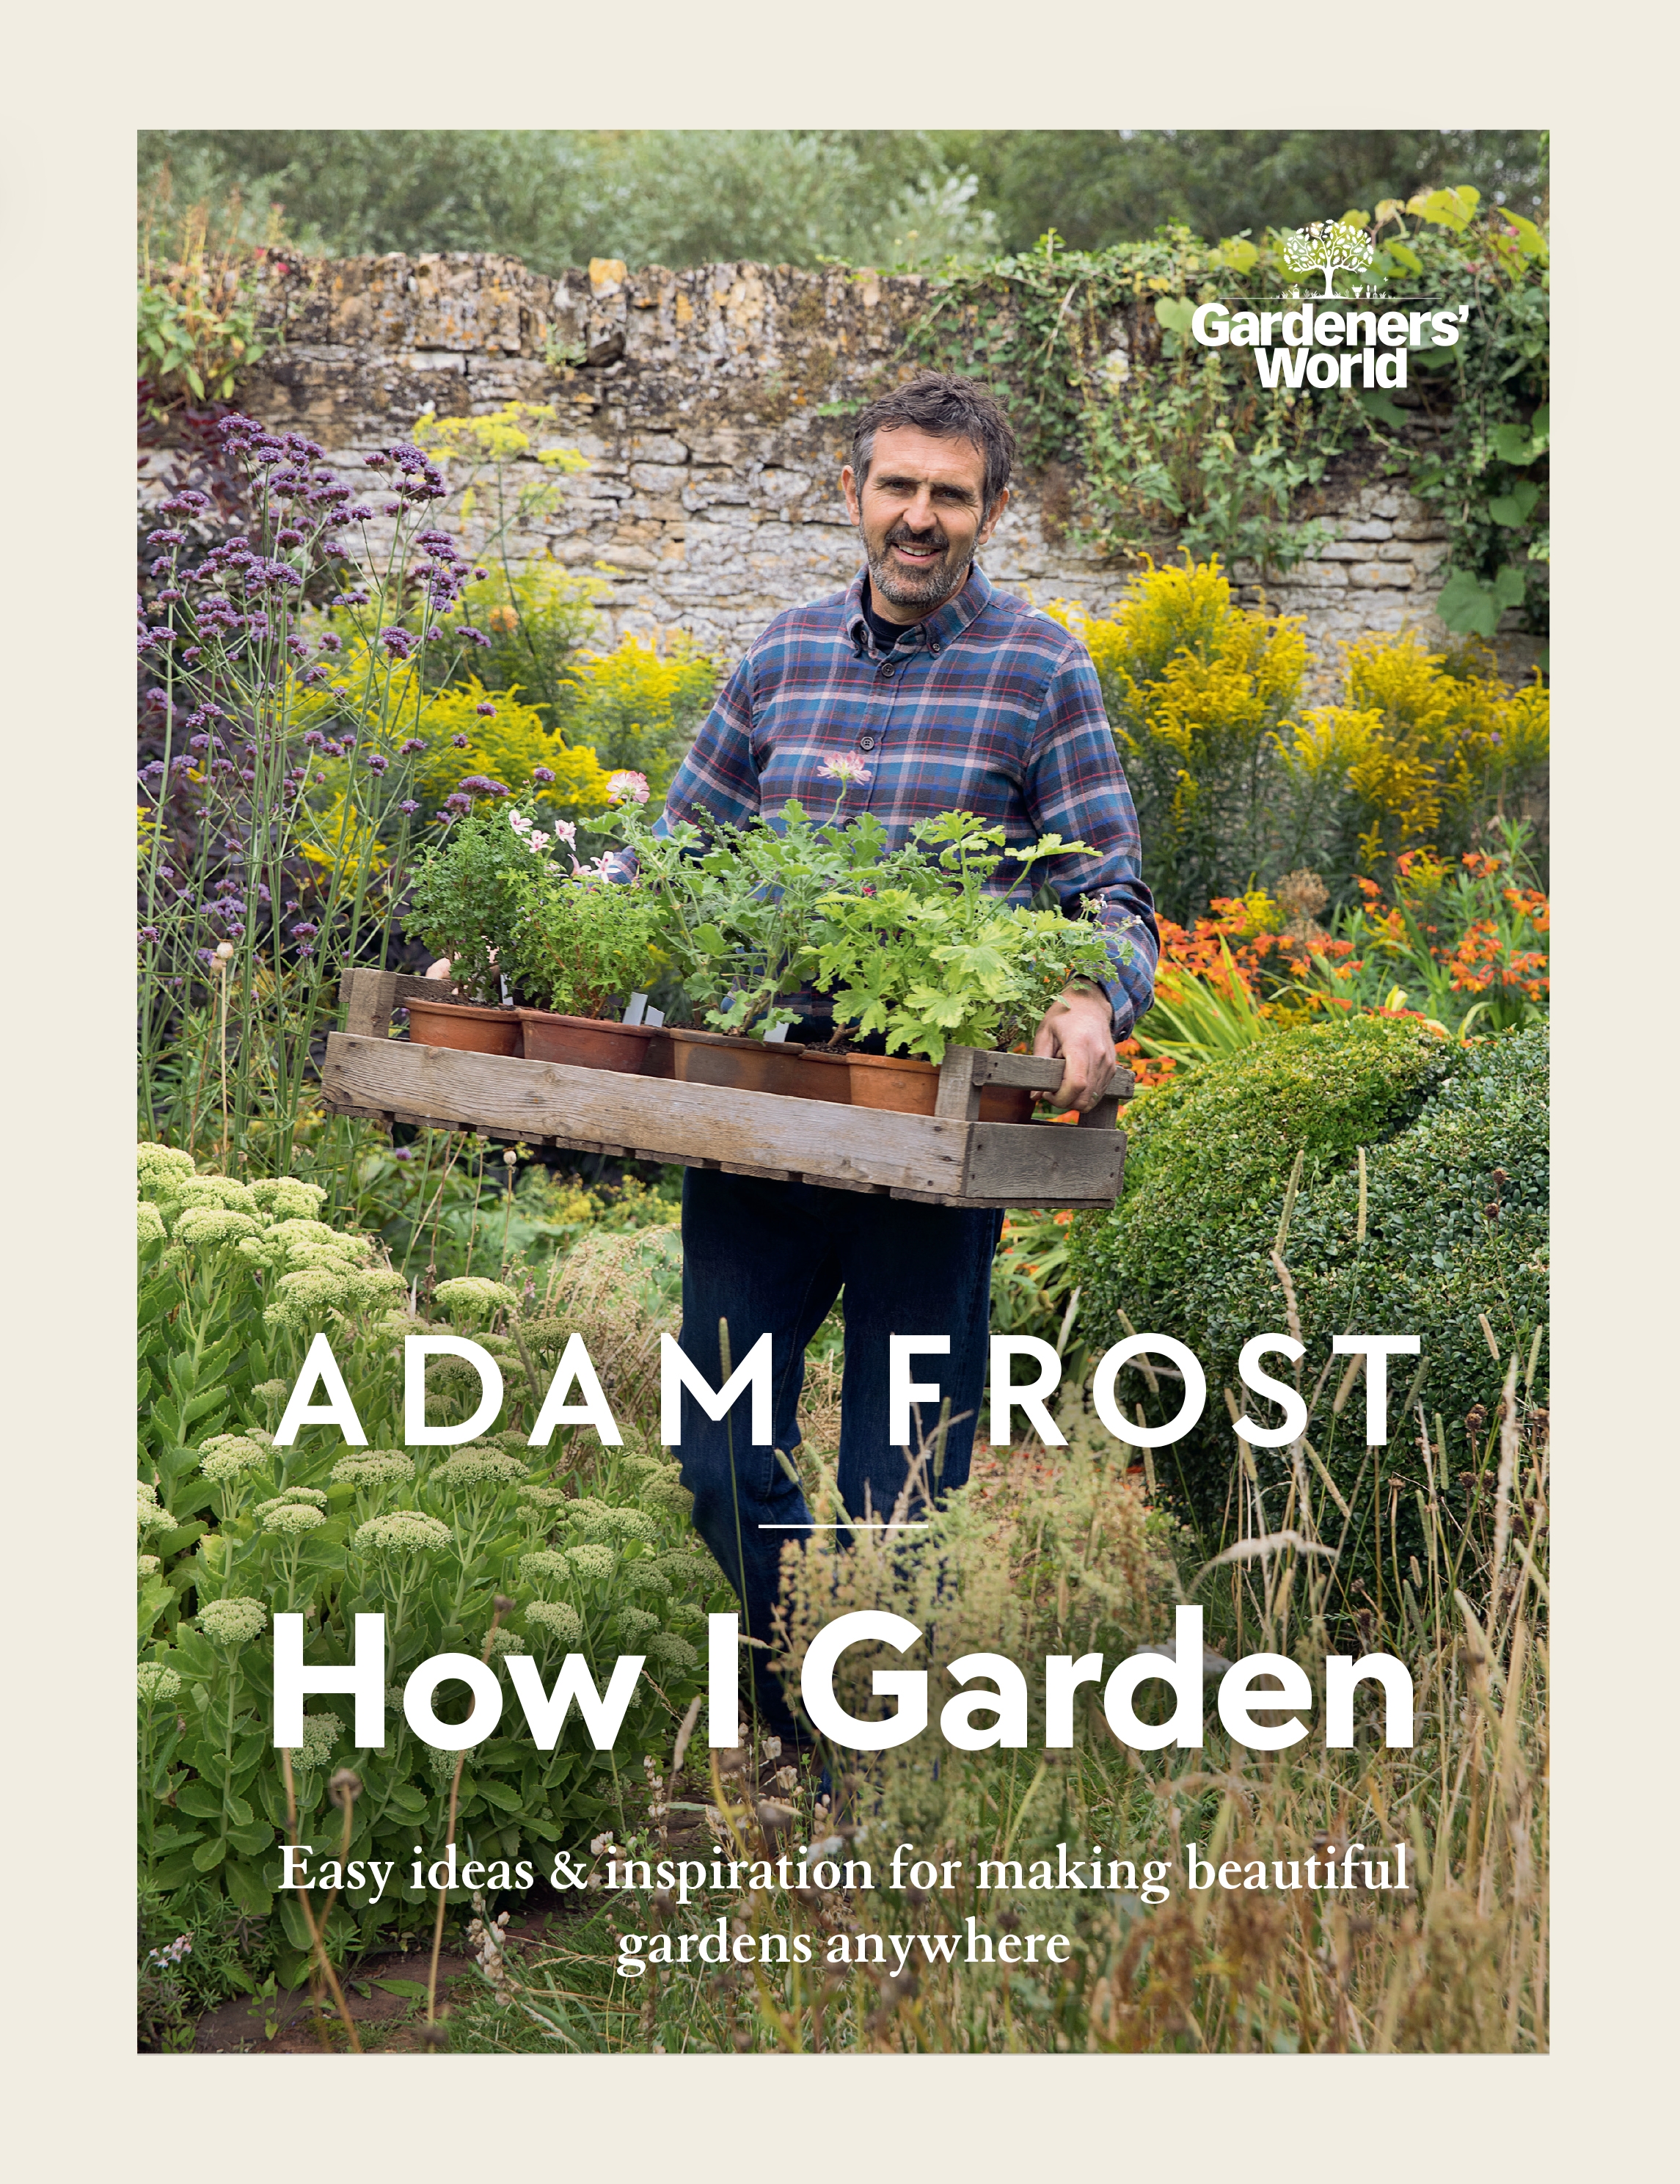 Book jacket of How I Garden by Adam Frost (Sarah Cuttle/BBC Books/PA)